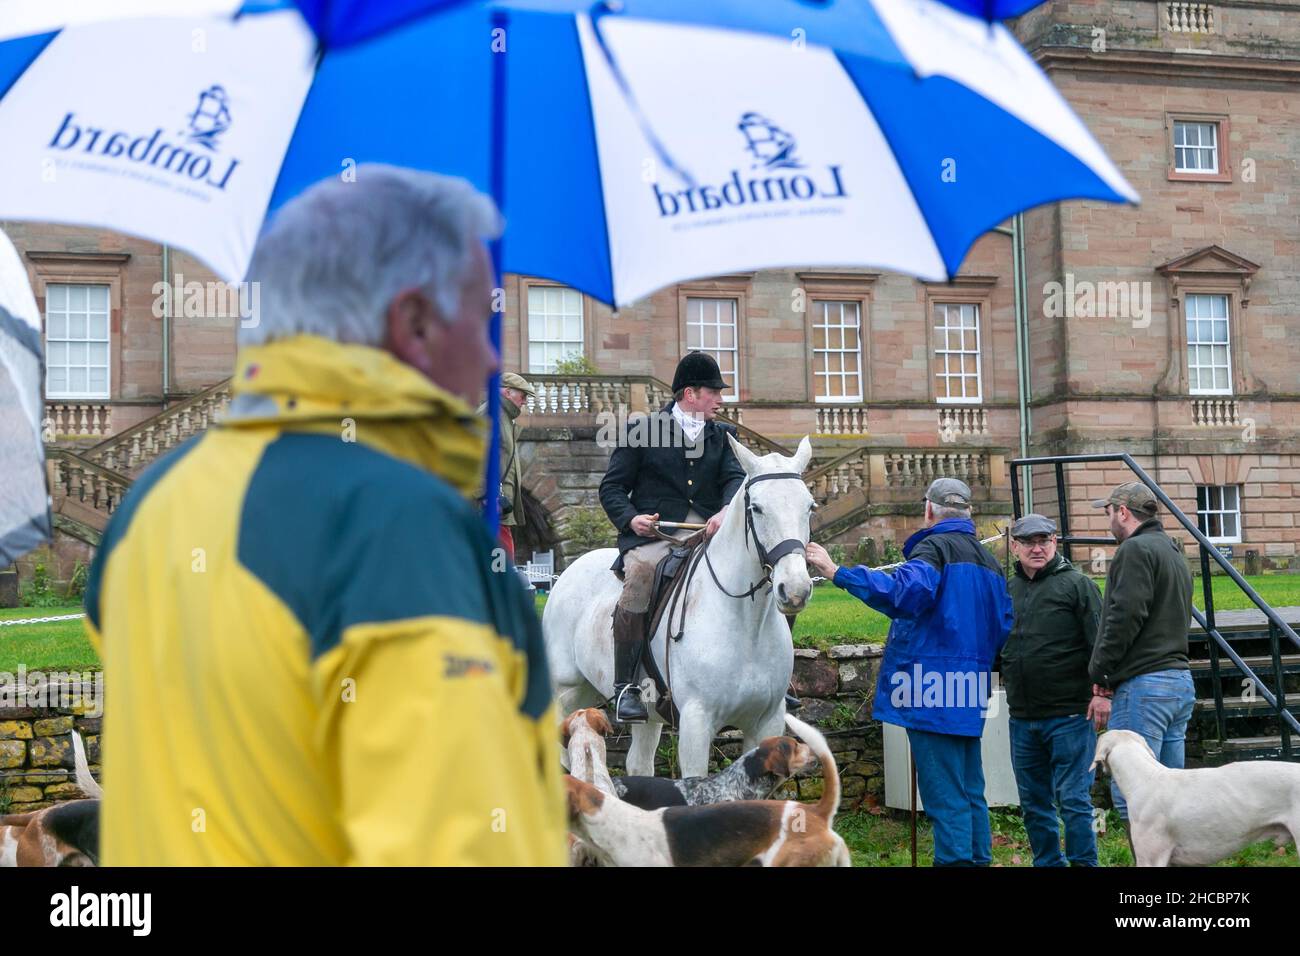 Hagley, Worcestershire, UK. 27th Dec, 2021. Horses and hounds gather with supporters in the rain for the first meet of the Albrighton and Woodland Hunt at Hagley Hall since the Coronavirus pandemic. The Albrighton and Woodland Hunt meet annually at Hagley Hall in Worcestershire. Credit: Peter Lopeman/Alamy Live News Stock Photo